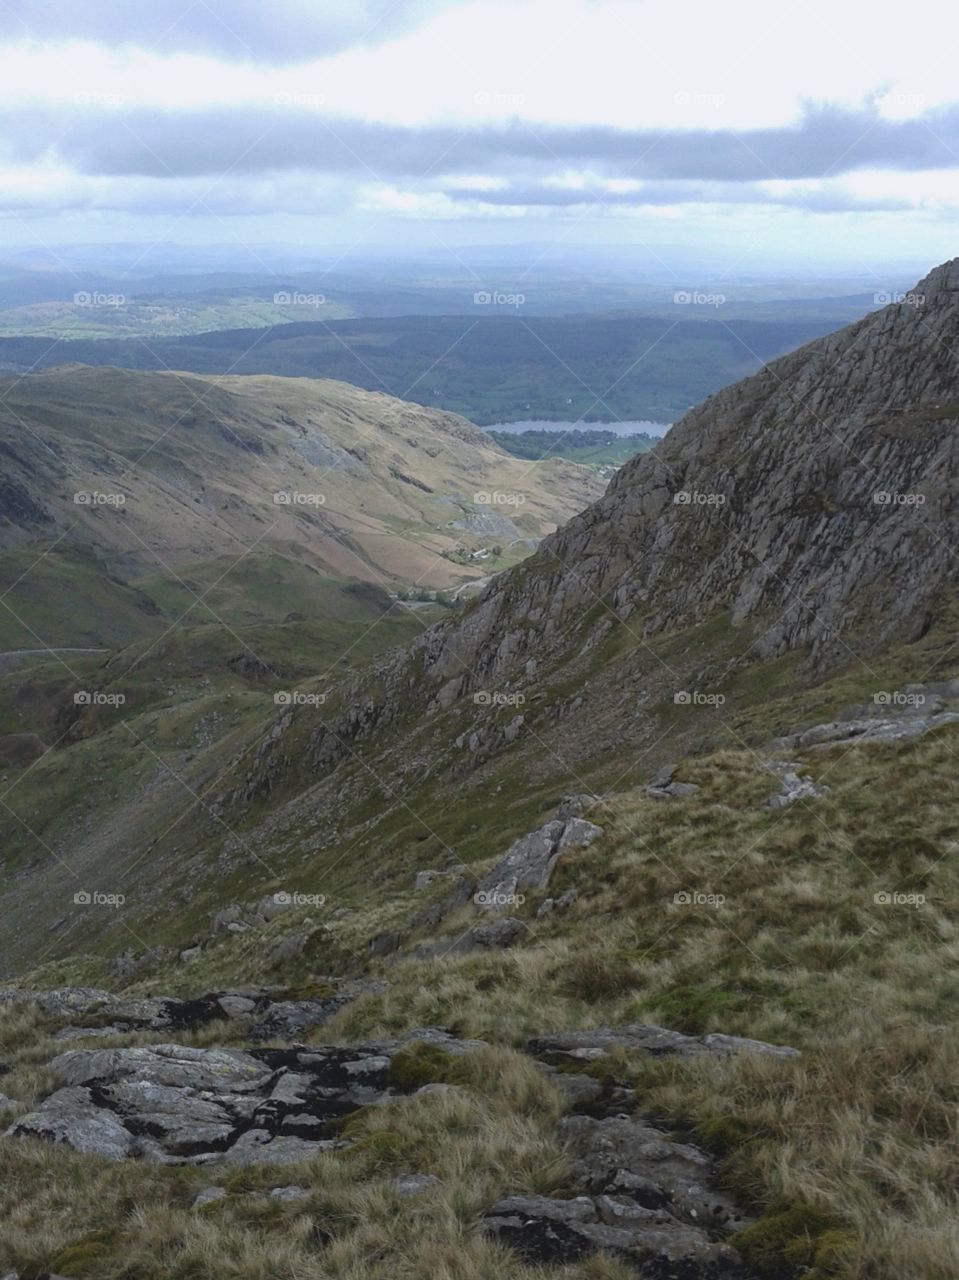 The view from atop the Old Man of Coniston truly is marvellous, the horizon stretching out for miles. The peaceful lake of Coniston Water can be seen in the background, the third largest lake in the Lake District.